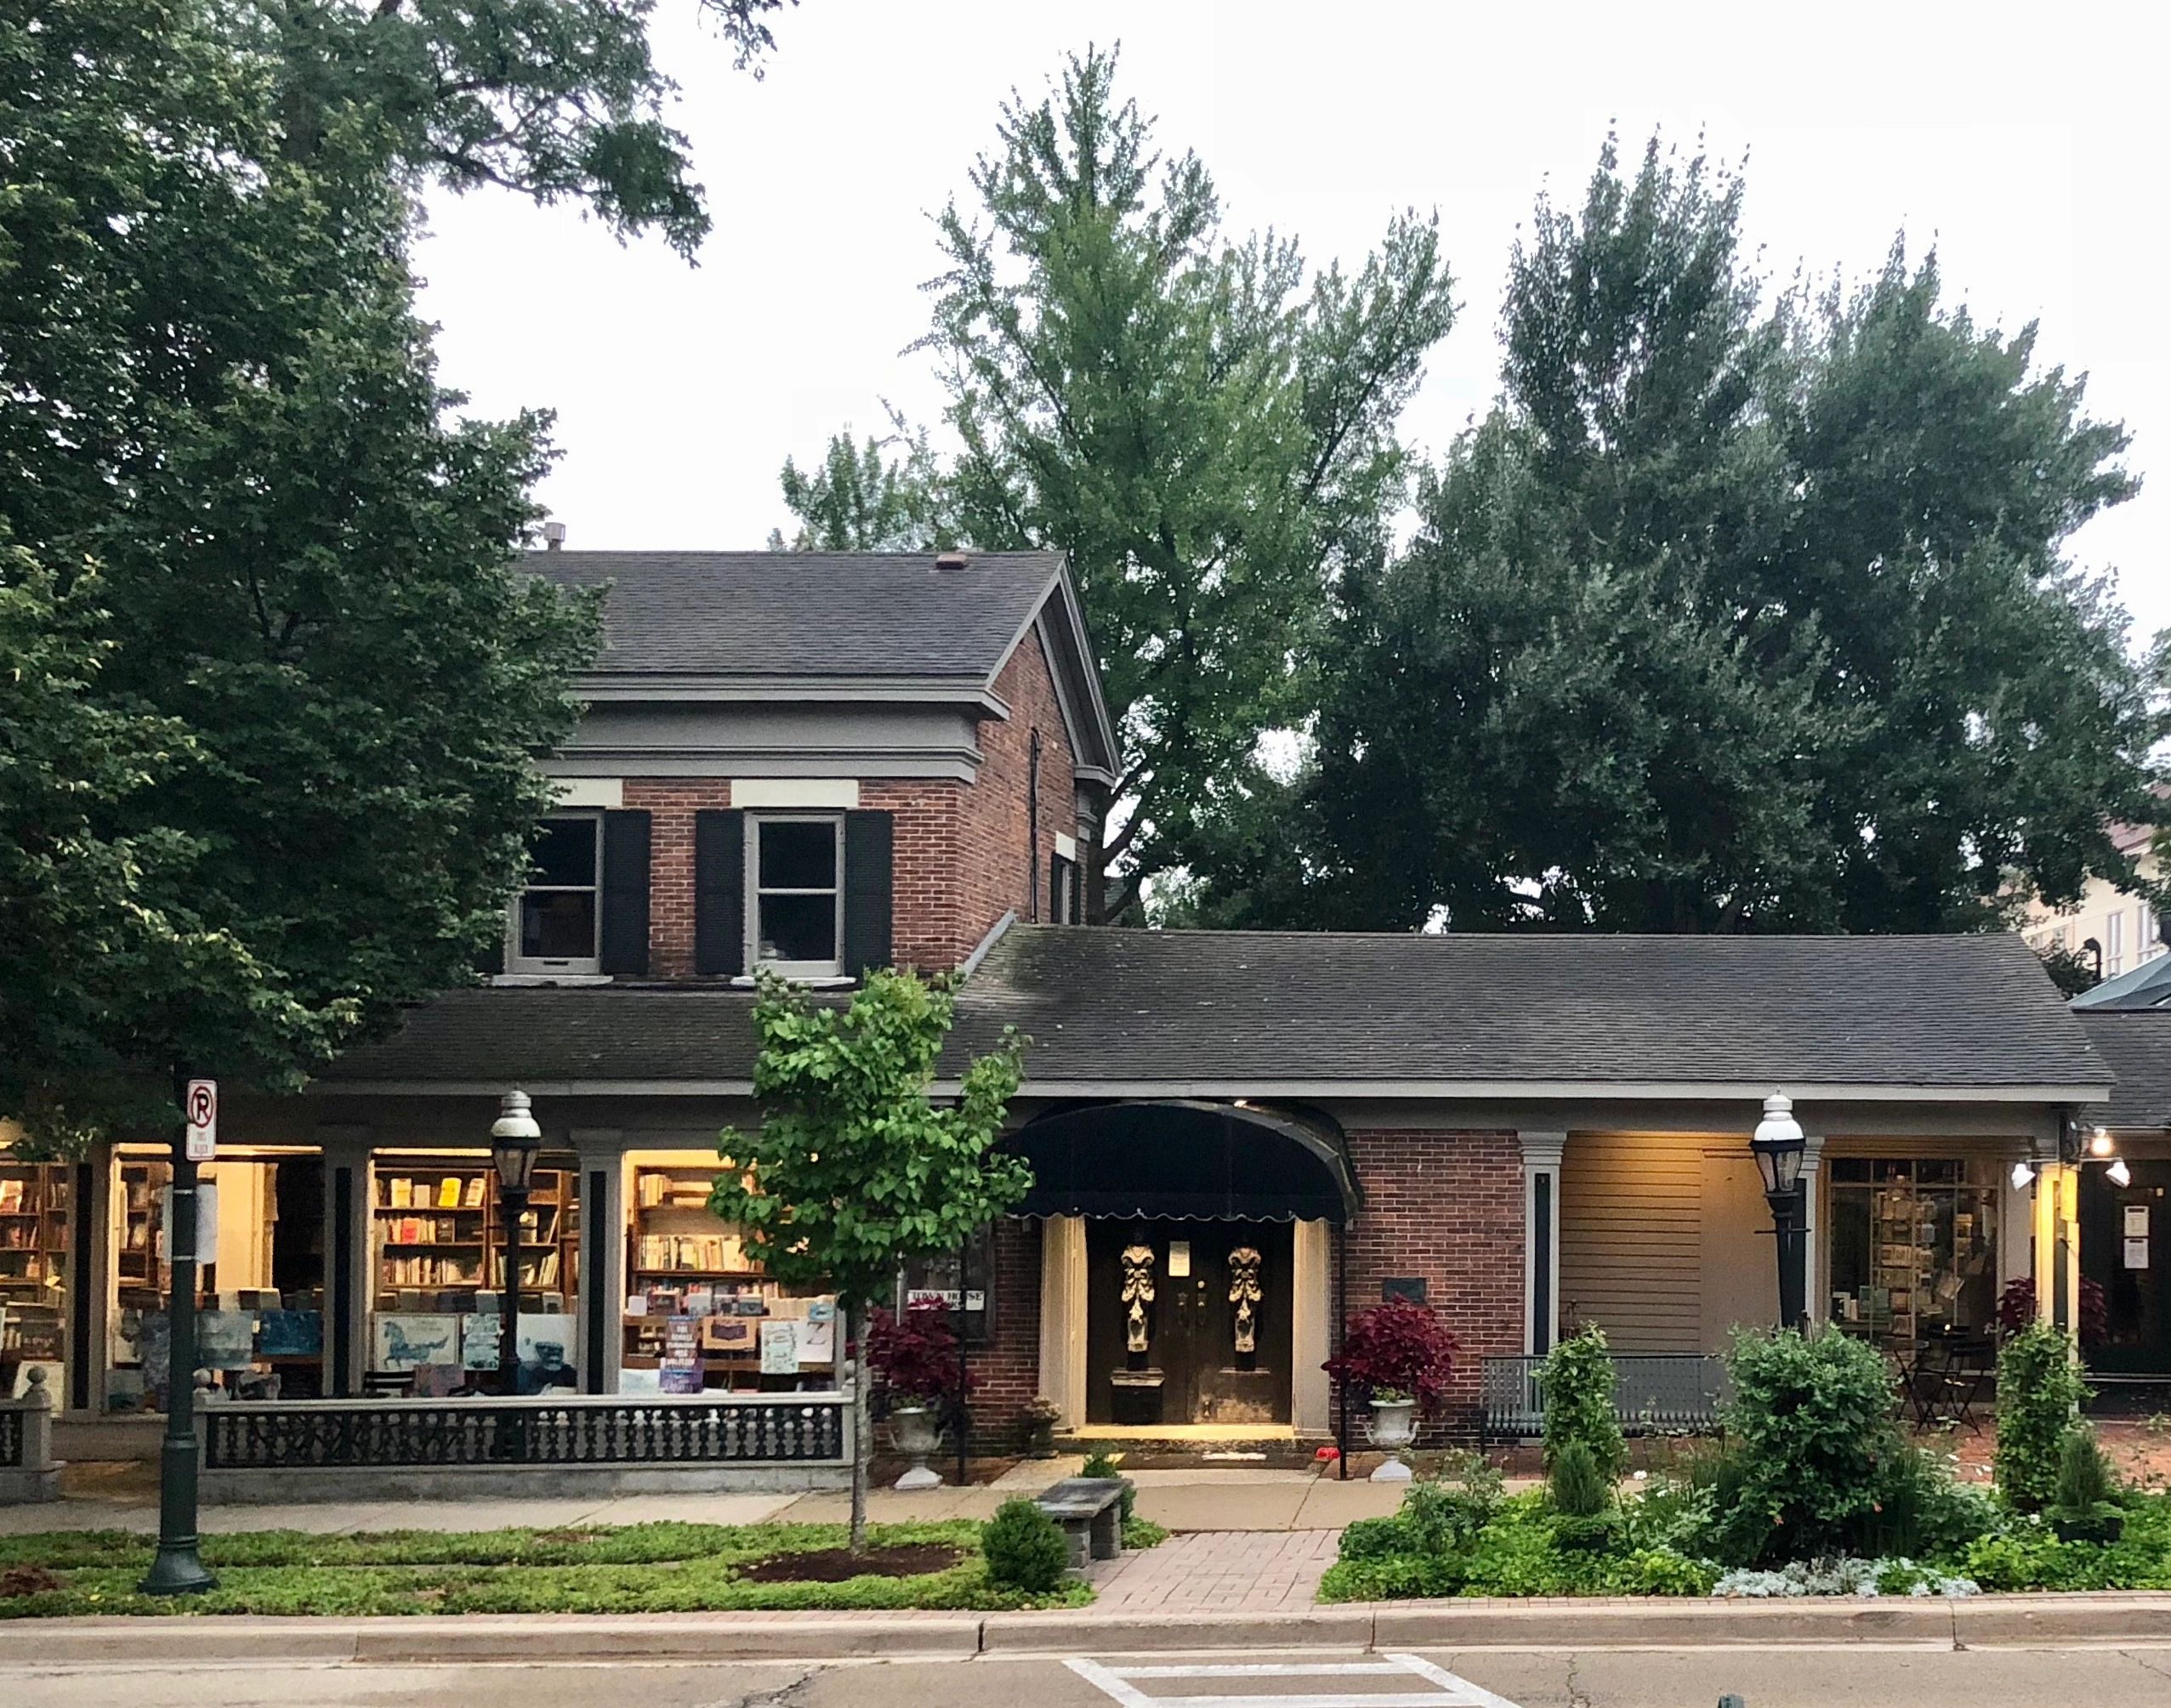 Town House Books & Cafe in St. Charles, IL